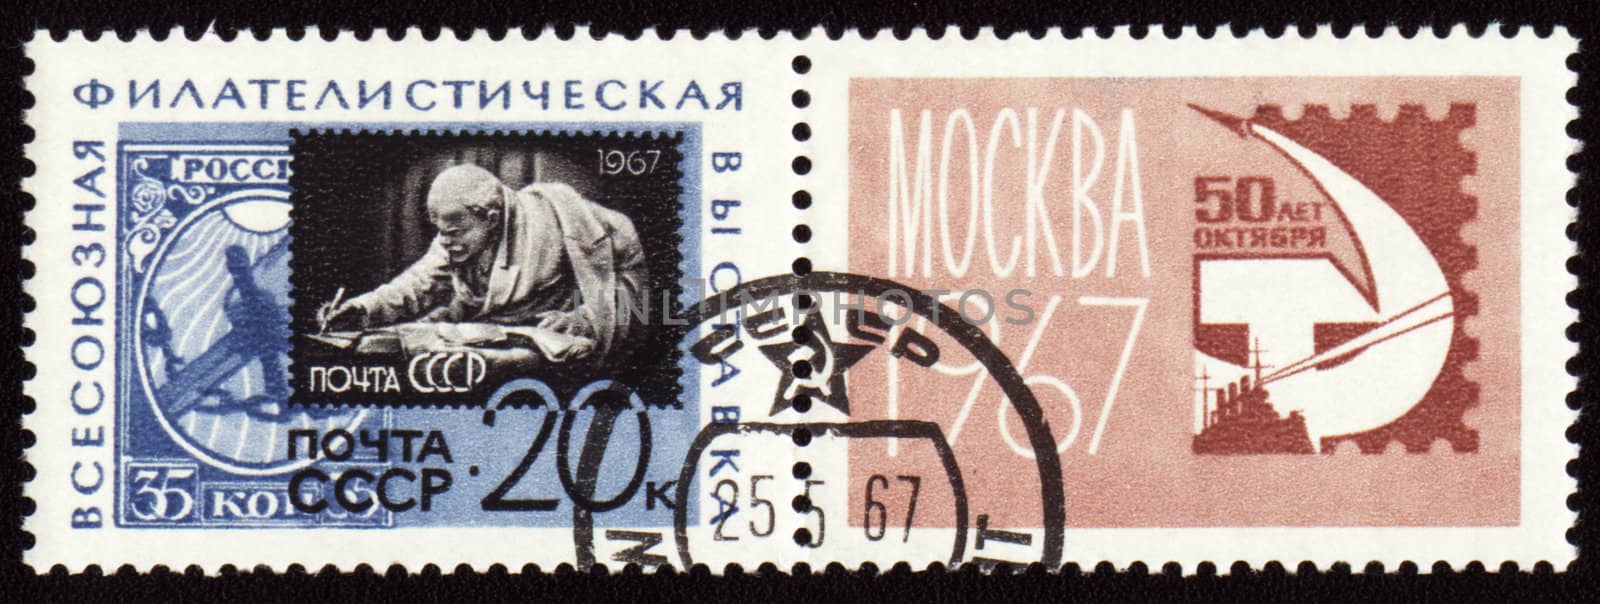 USSR - CIRCA 1967: A stamp printed in USSR shows Lenin (devoted to the Philatelic Exhibition "50 Years of the Great October"), circa 1967